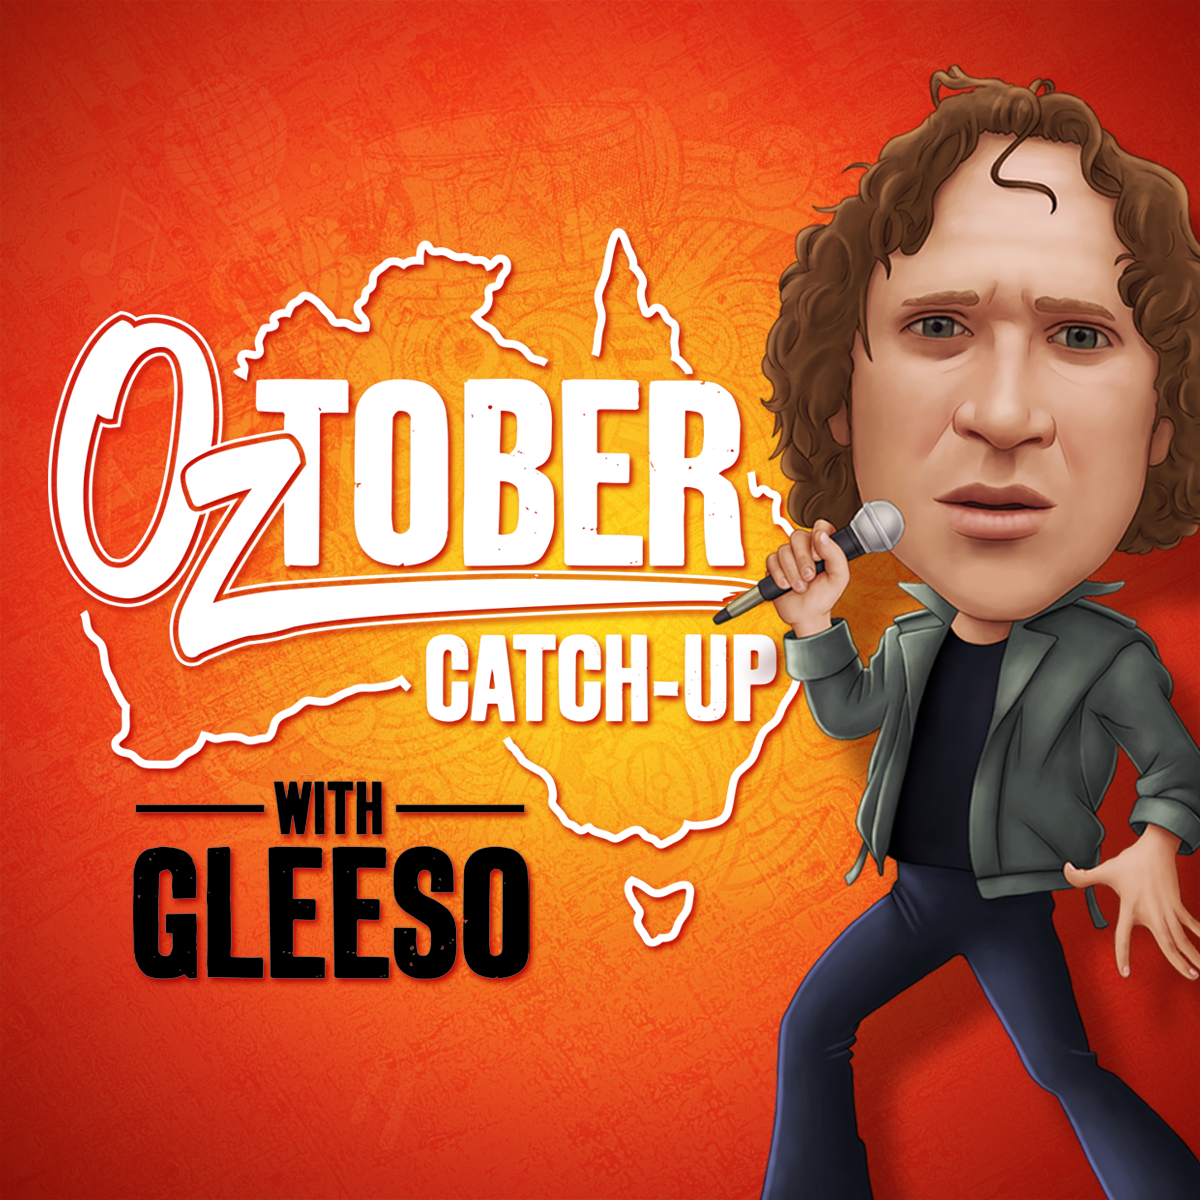 Oztober Catch-Up with Gleeso - Mark Gable from The Choirboys